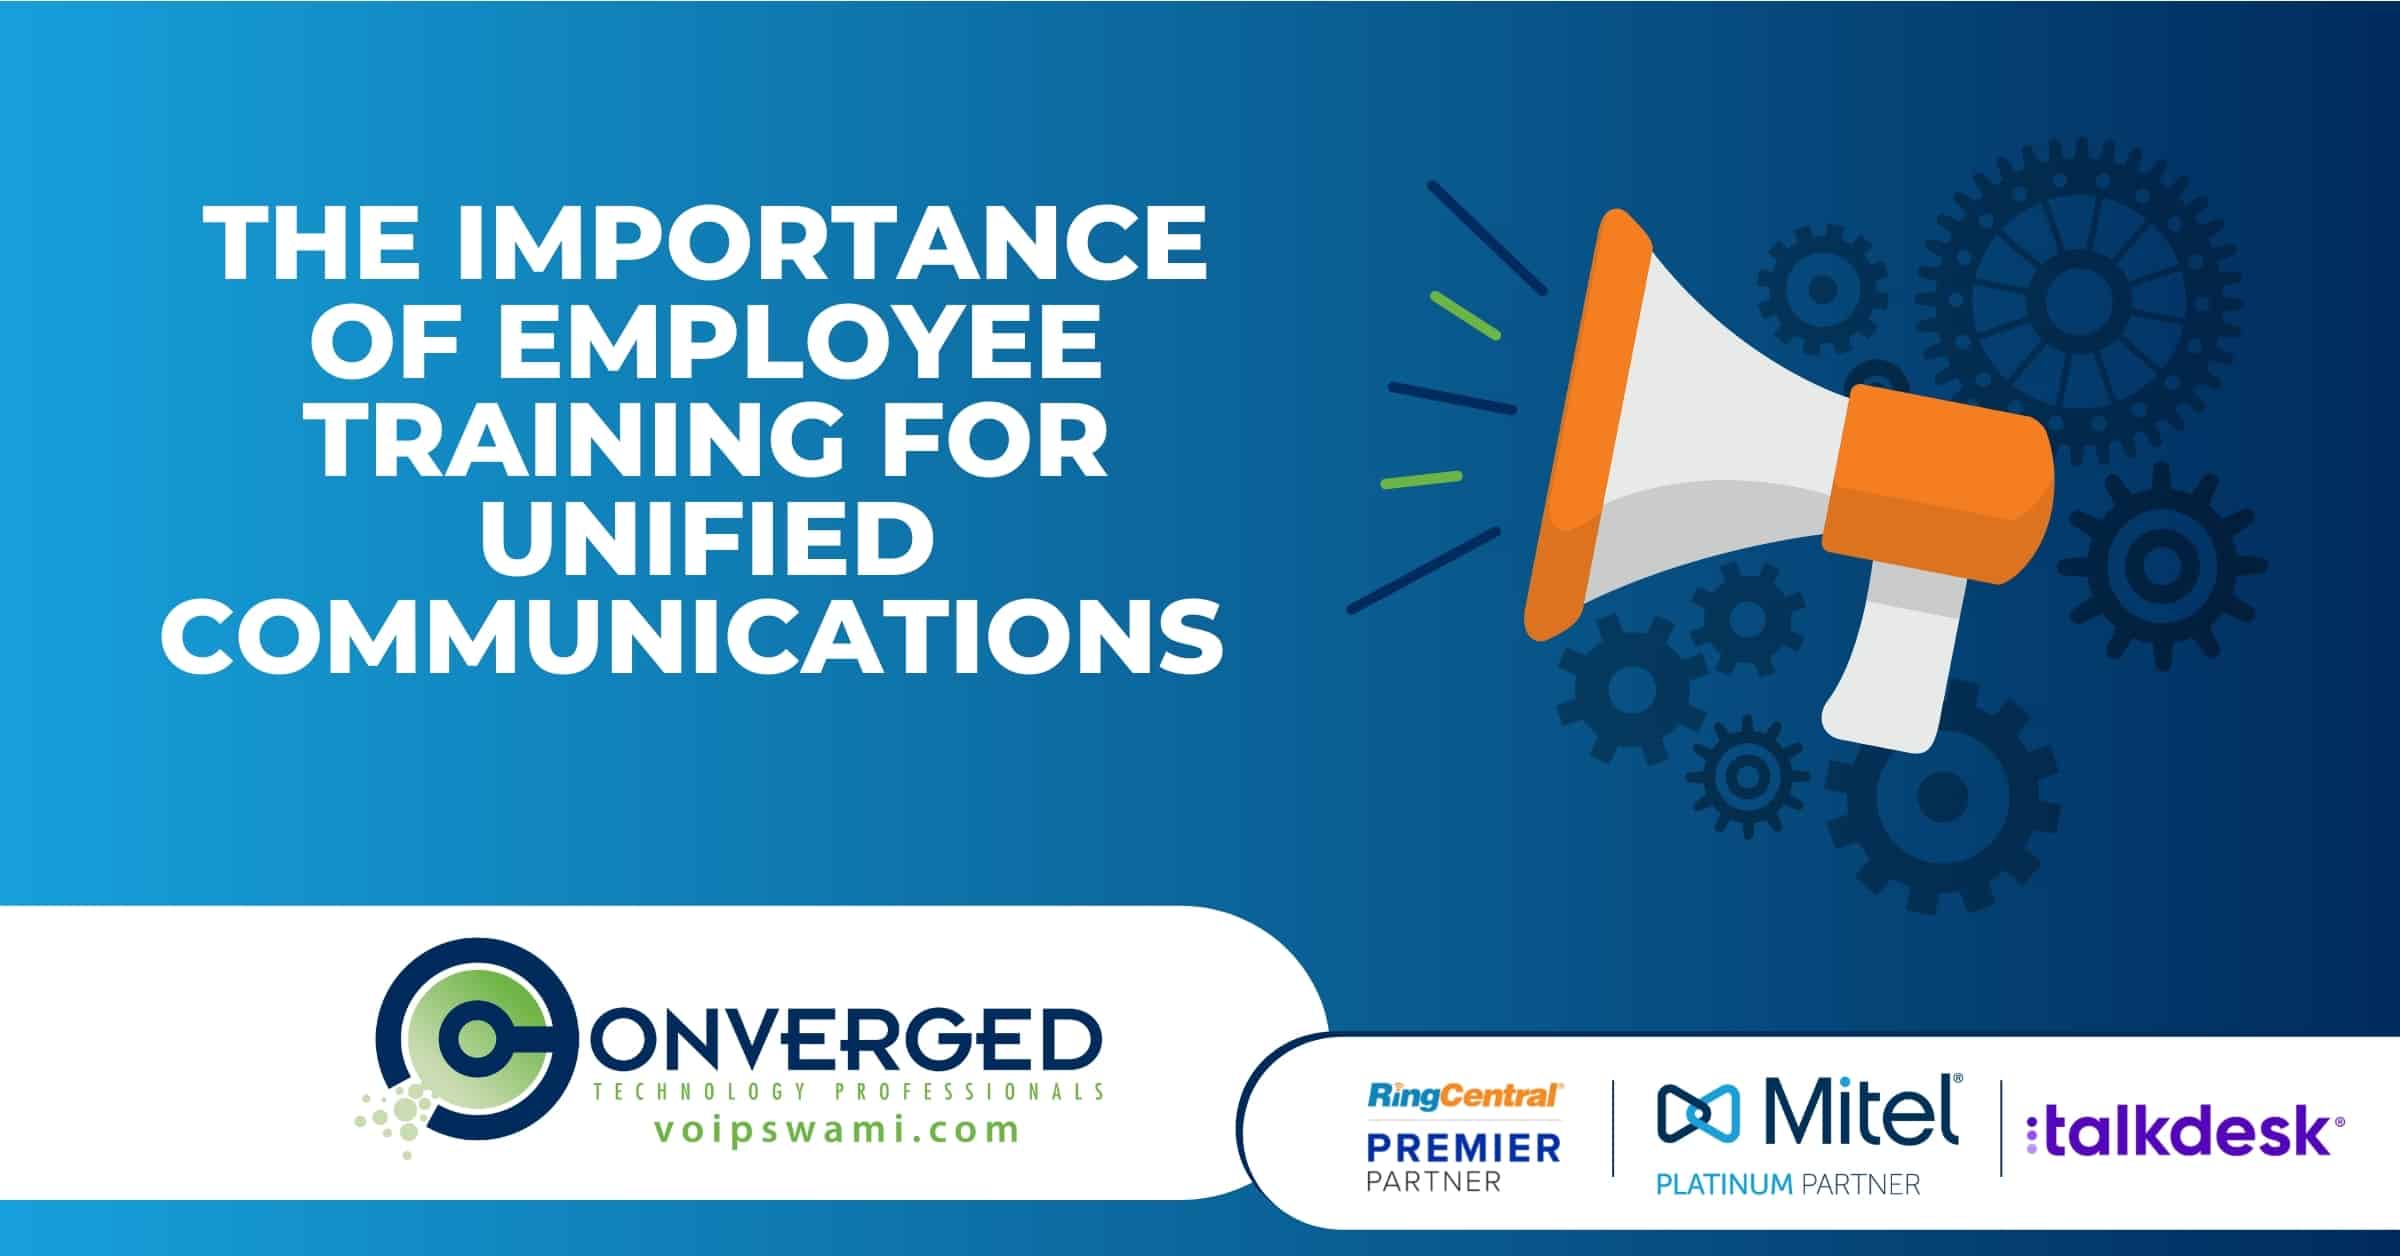 The Importance of Employee Training for Unified Communications